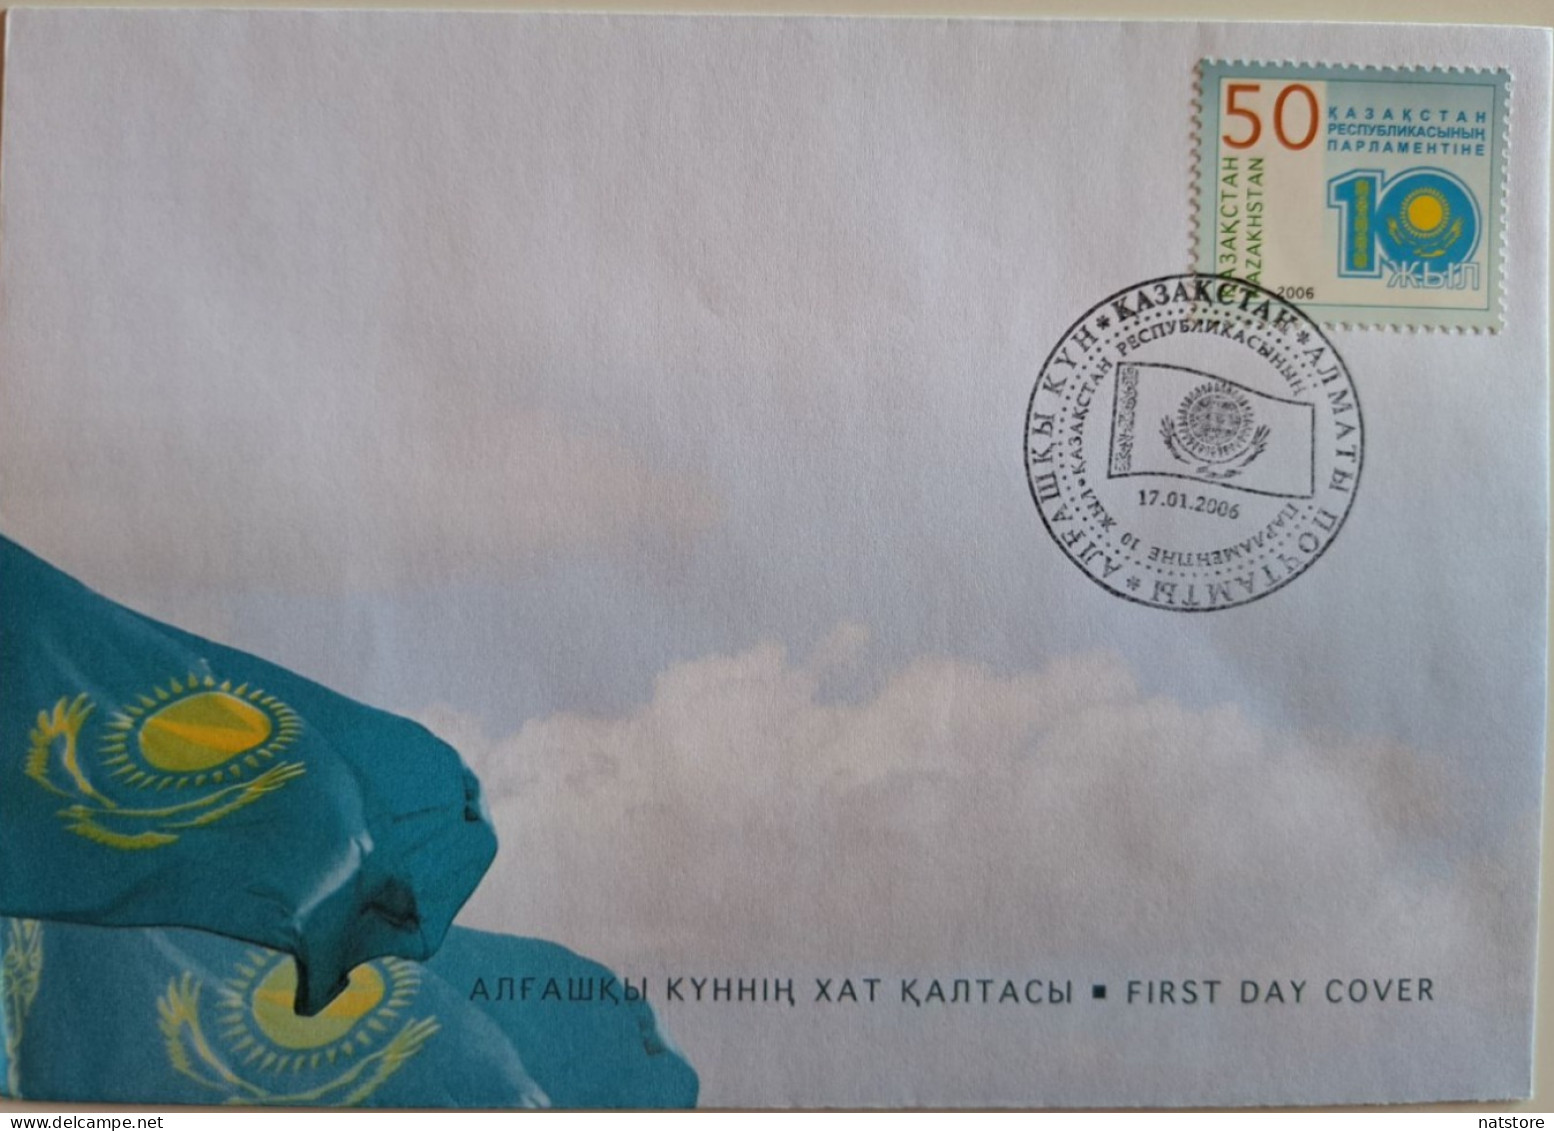 2006..KAZAKHSTAN...FDC WITH  STAMP...NEW..The 10th Anniversary Of Parliament Of Republic Of Kazakhstan..RARE!!! - Omslagen